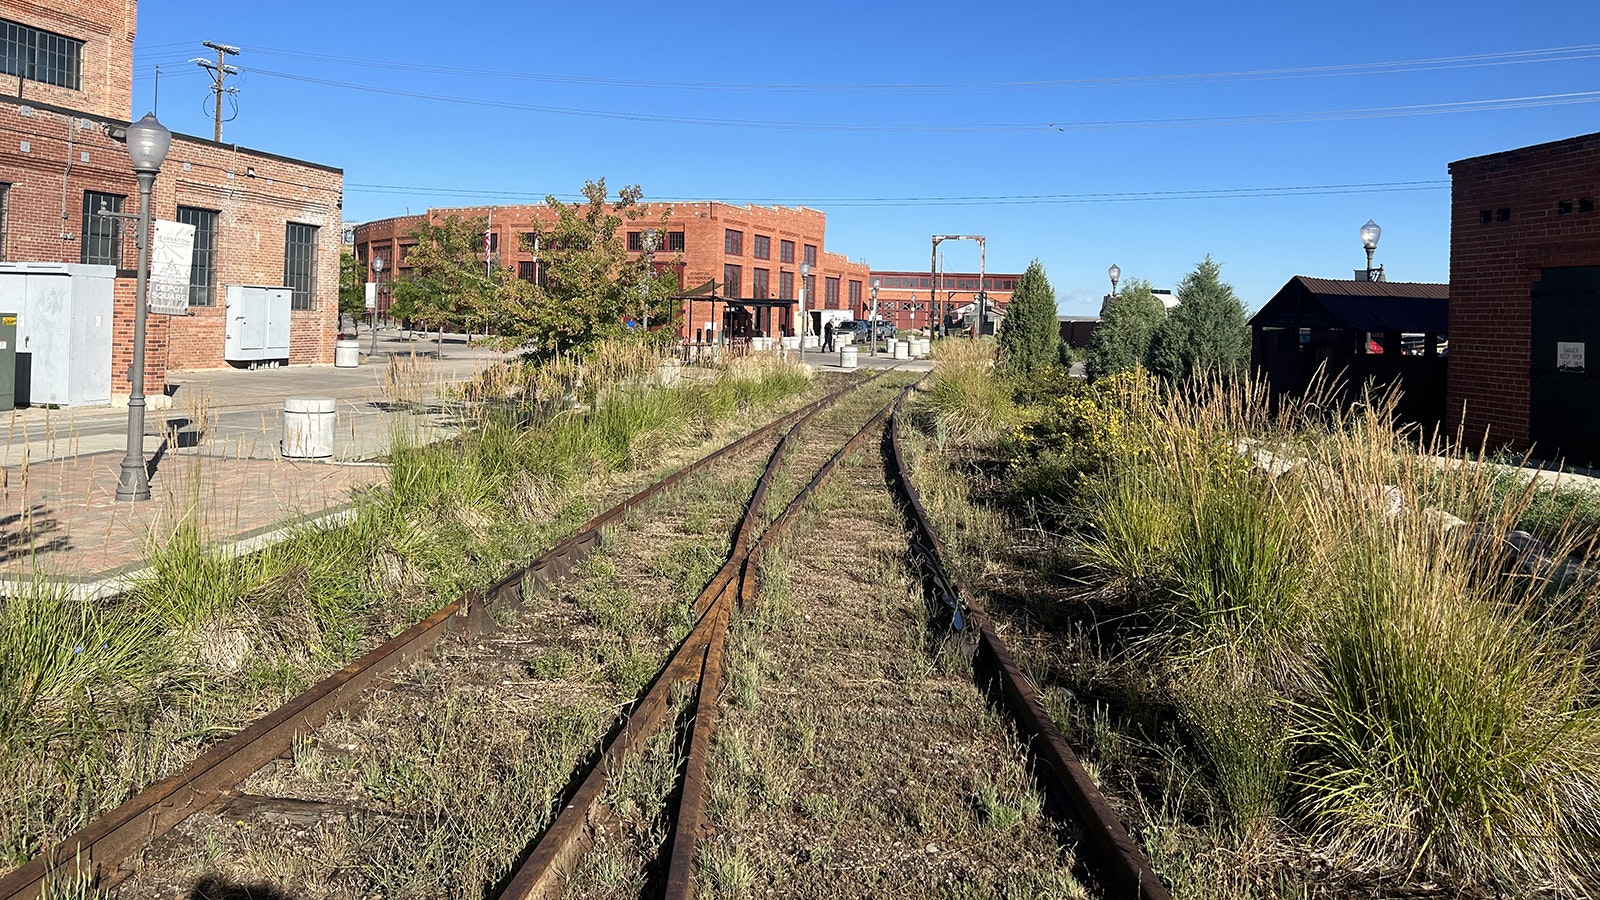 Old tracks lead toward the Evanston Roundhouse. Part of the building was refurbished in 2007 and is now used as a community center. Phase two of the project is currently underway.